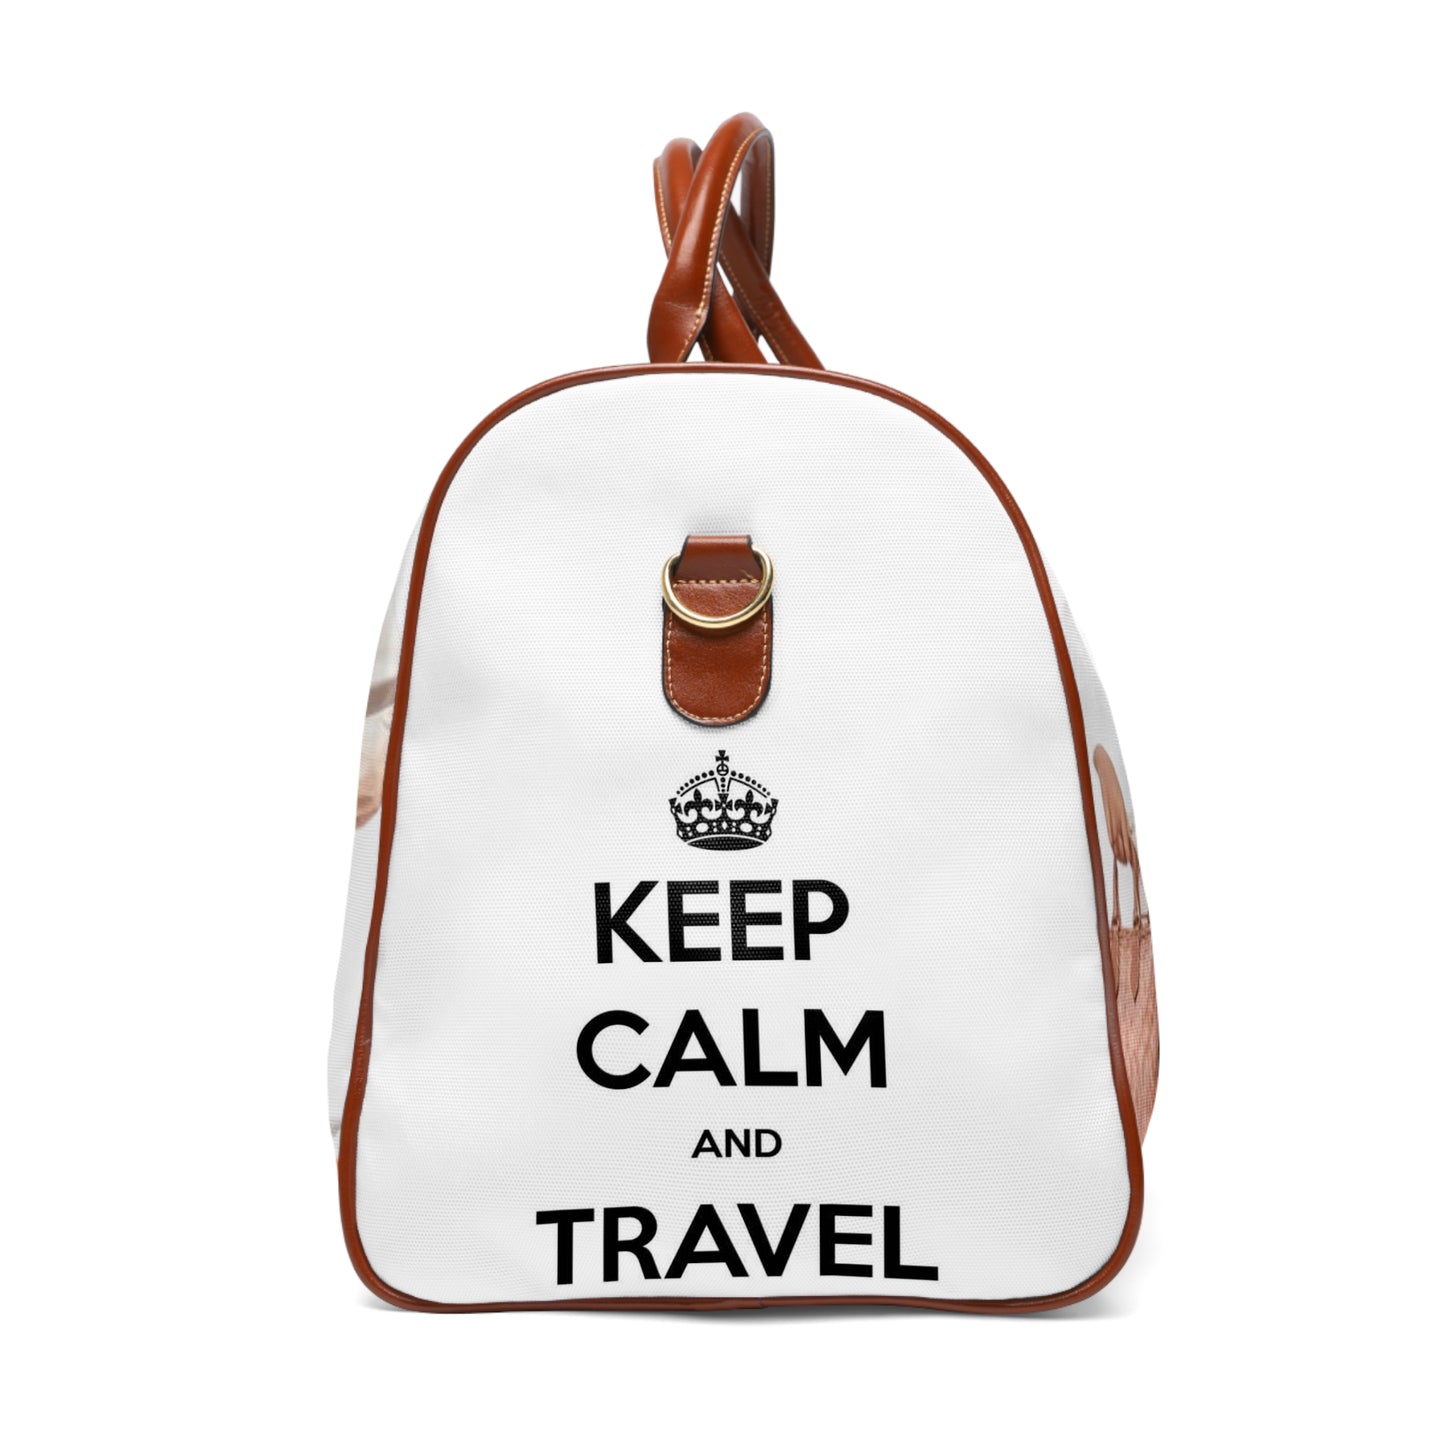 Adventure-Ready: Waterproof Travel Bag with Stylish Designs For The Adventurous Man (KEEP CALM)